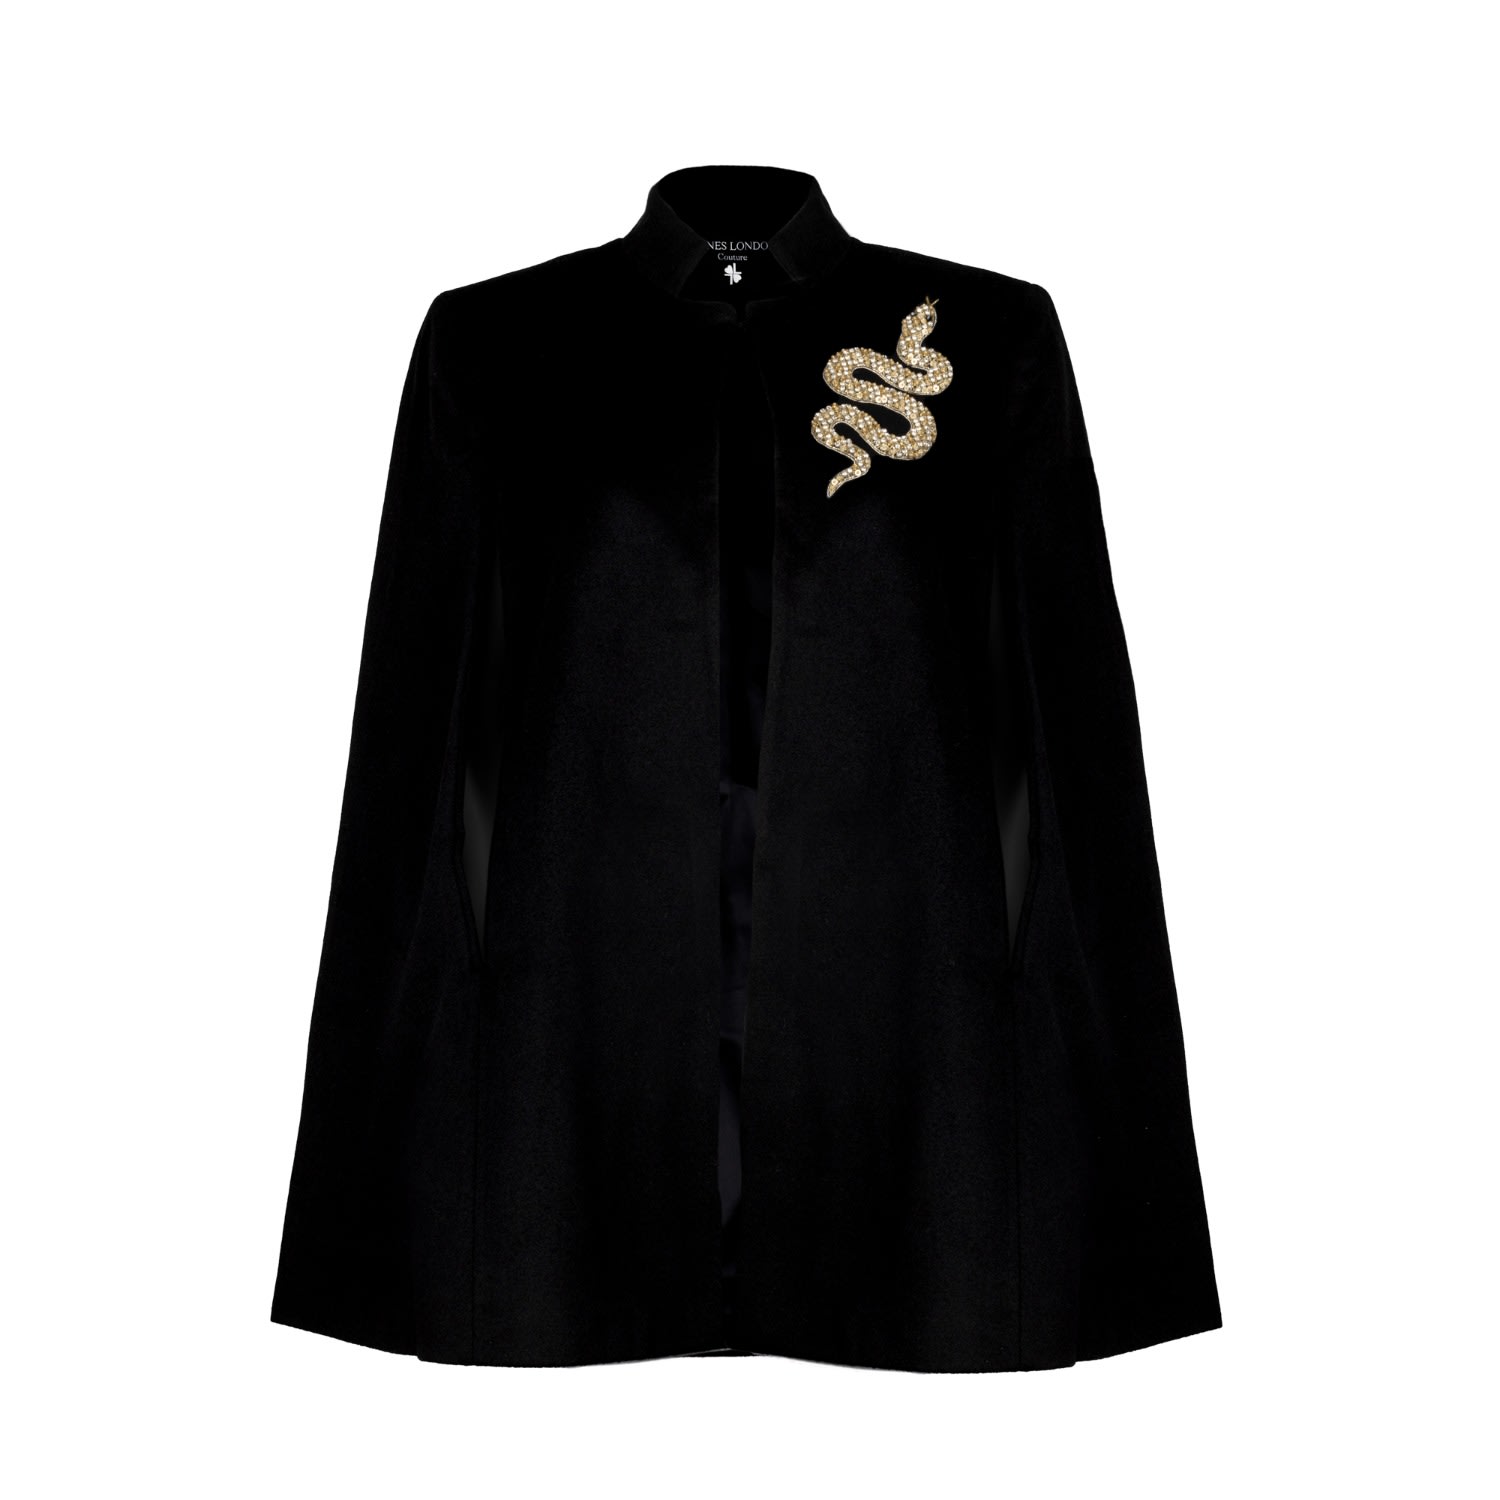 Laines London Women's Laines Couture Wool Blend Cape With Embellished Gold Snake - Black